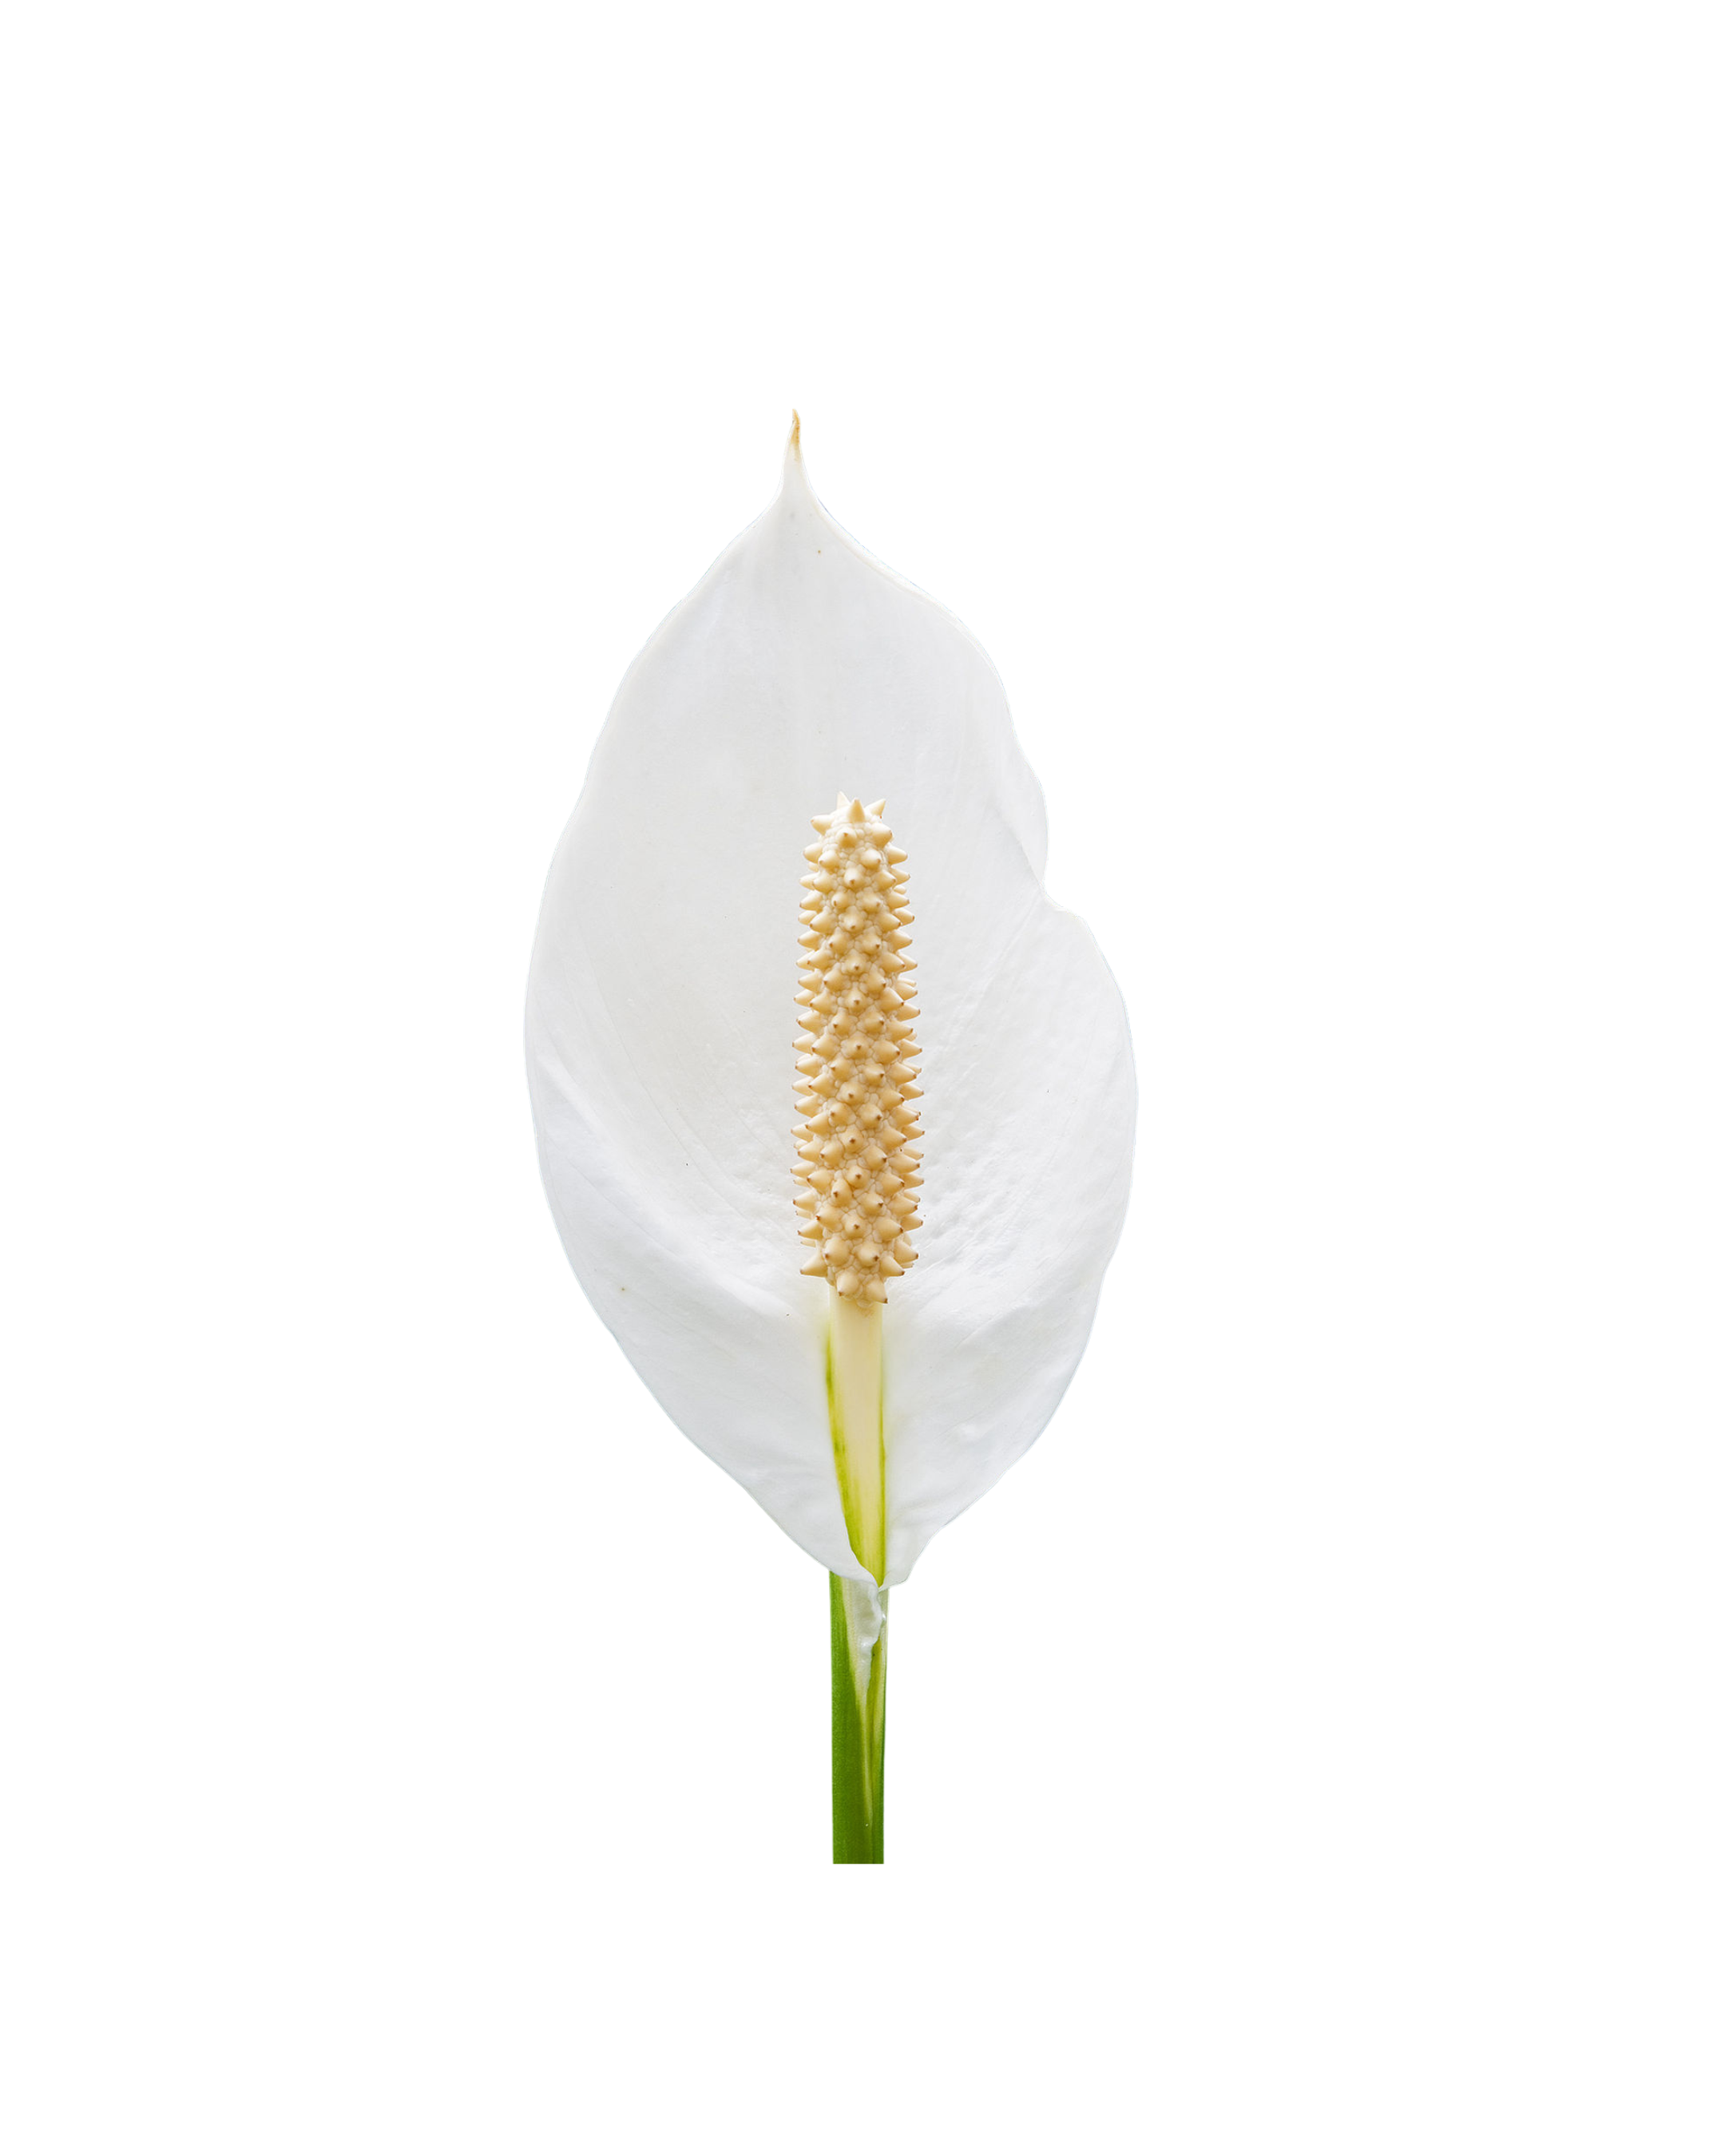 Peace Lily - Spathiphyllum Sweet Romano